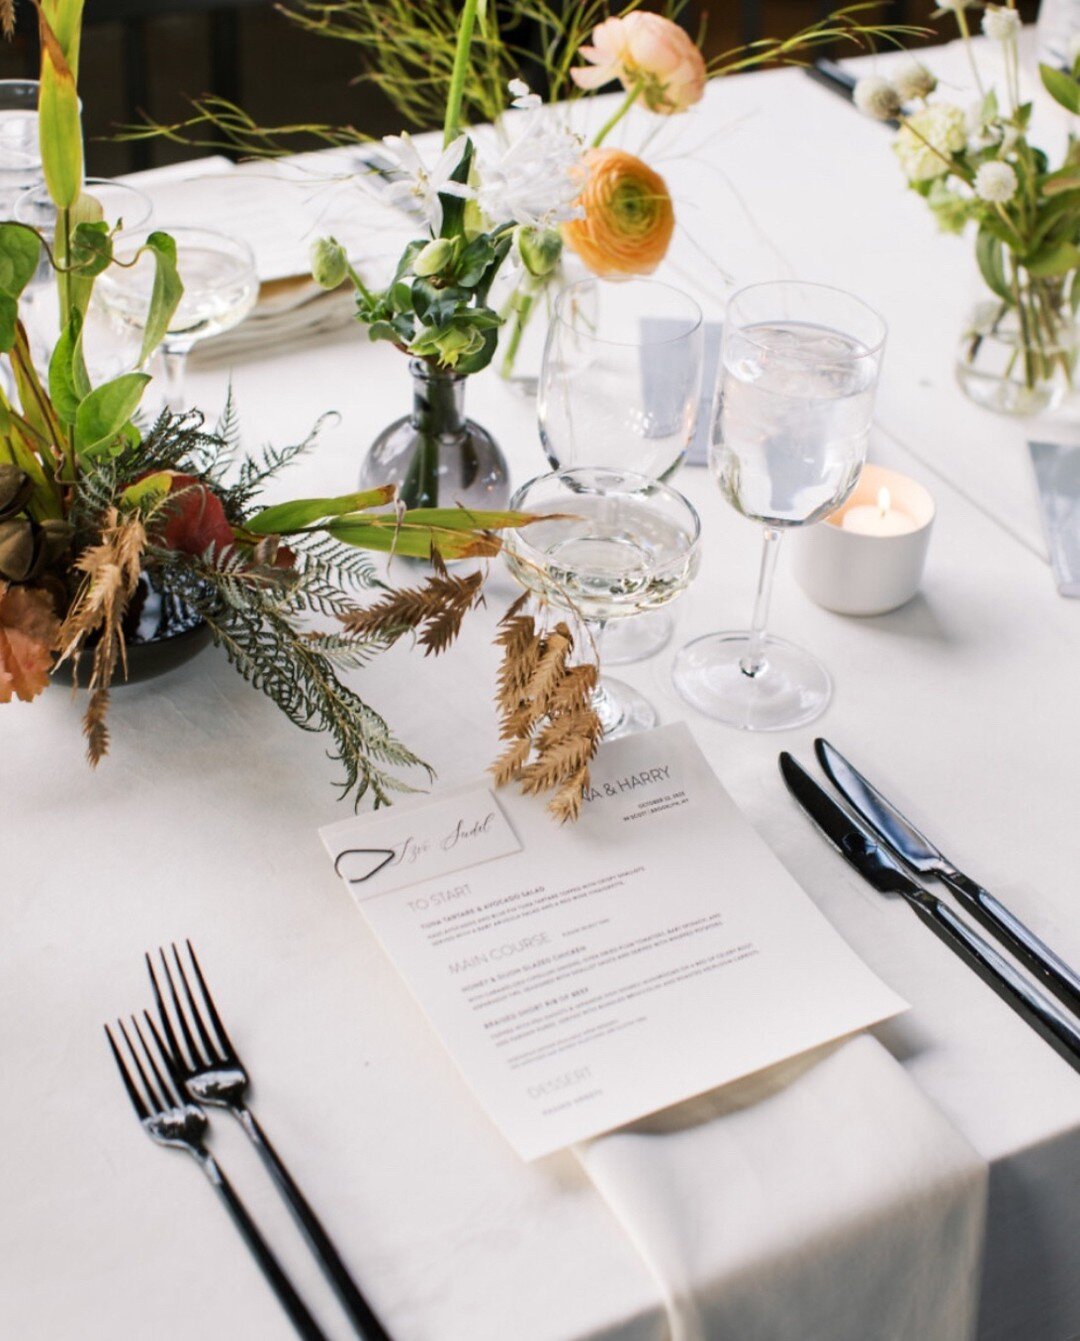 It's no secret that we love color around here, but sometimes a minimal black and white menu is *chef's kiss* 

Planning &amp; Design @fireflyevents
Photography @judson_rappaport
Florals @sarahsaundersstudio
Paper &amp; Signage @jubileepaper
Calligrap